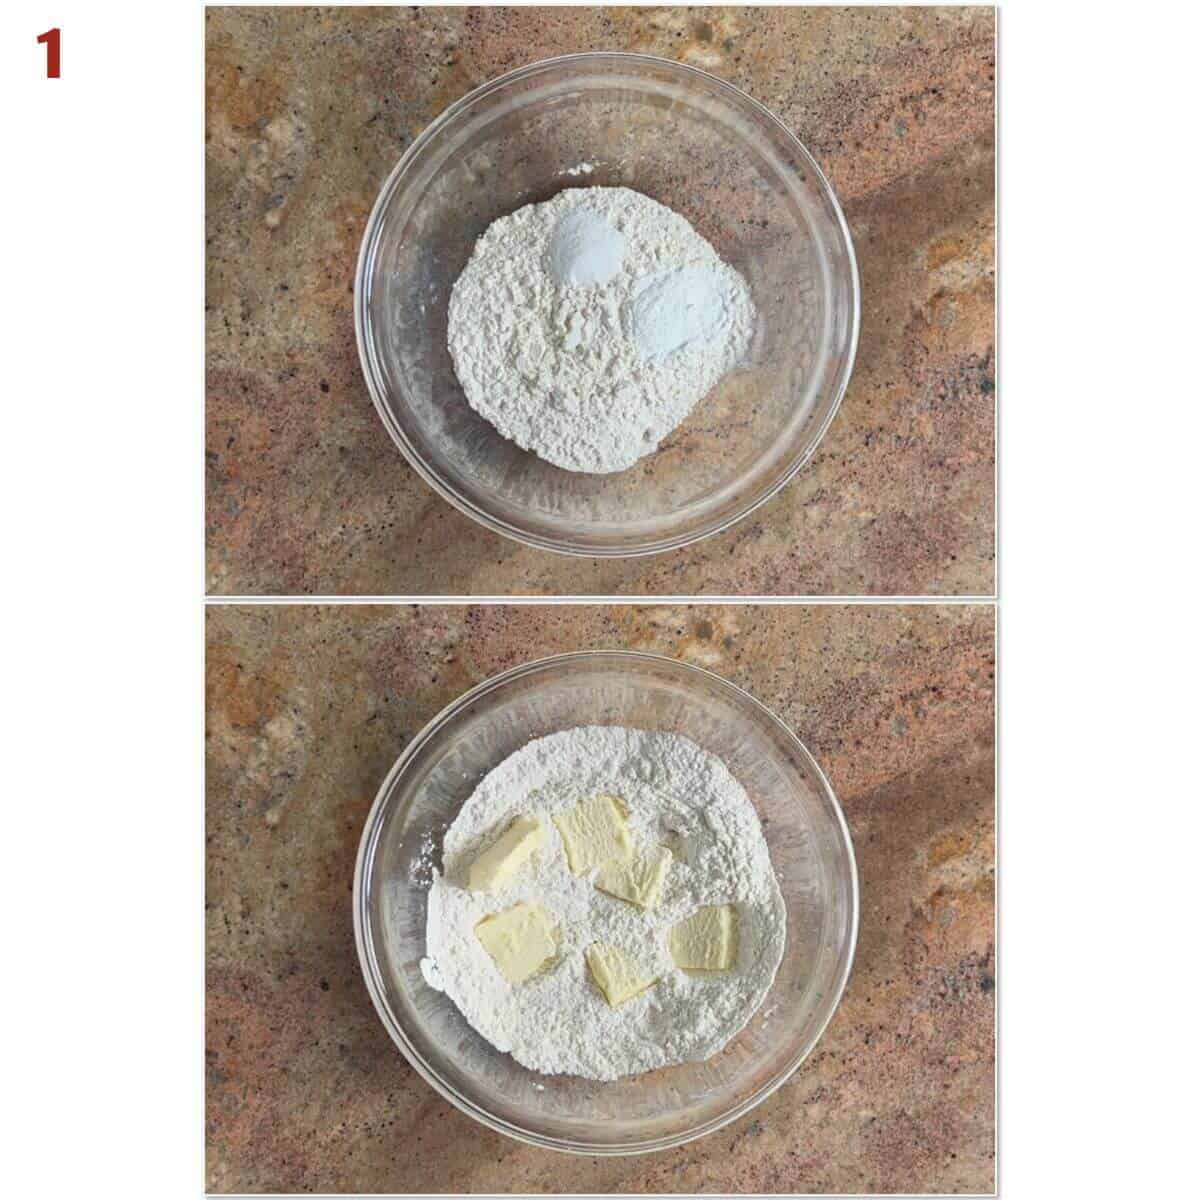 Collage of mixing flour, baking powder, salt, and butter in a glass bowl from overhead.